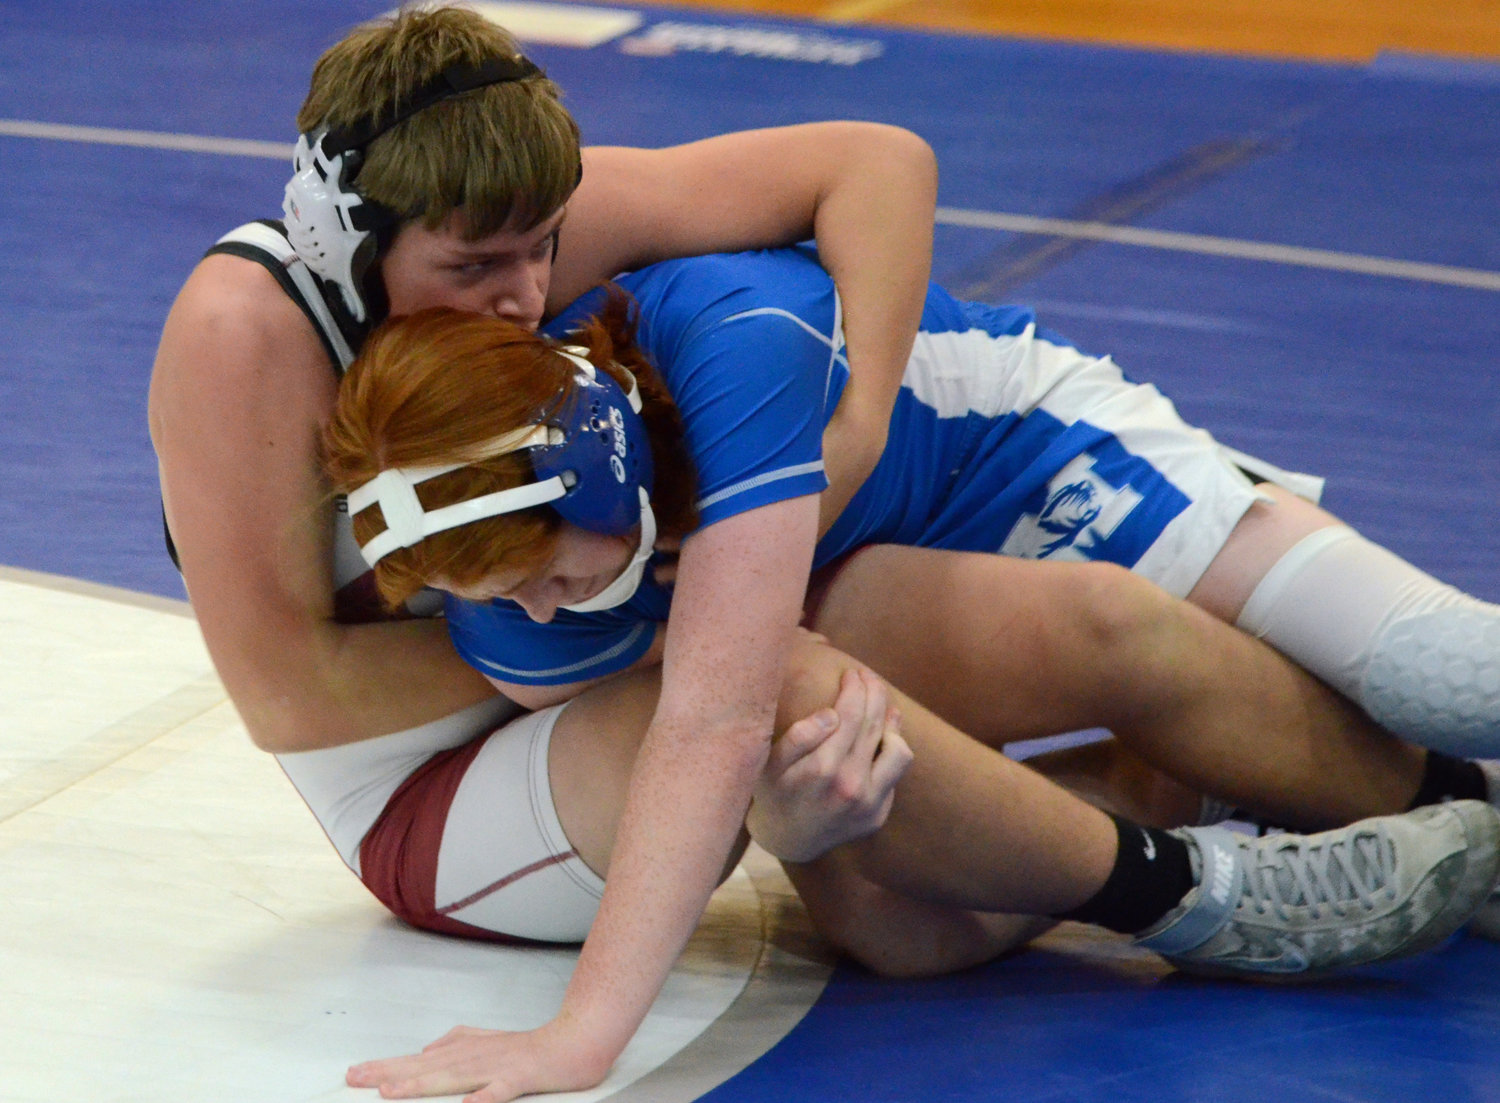 Cornersville’s Caden Bush battles with Ryan Bentley from Marshall County High School in the 138-pound weight class.